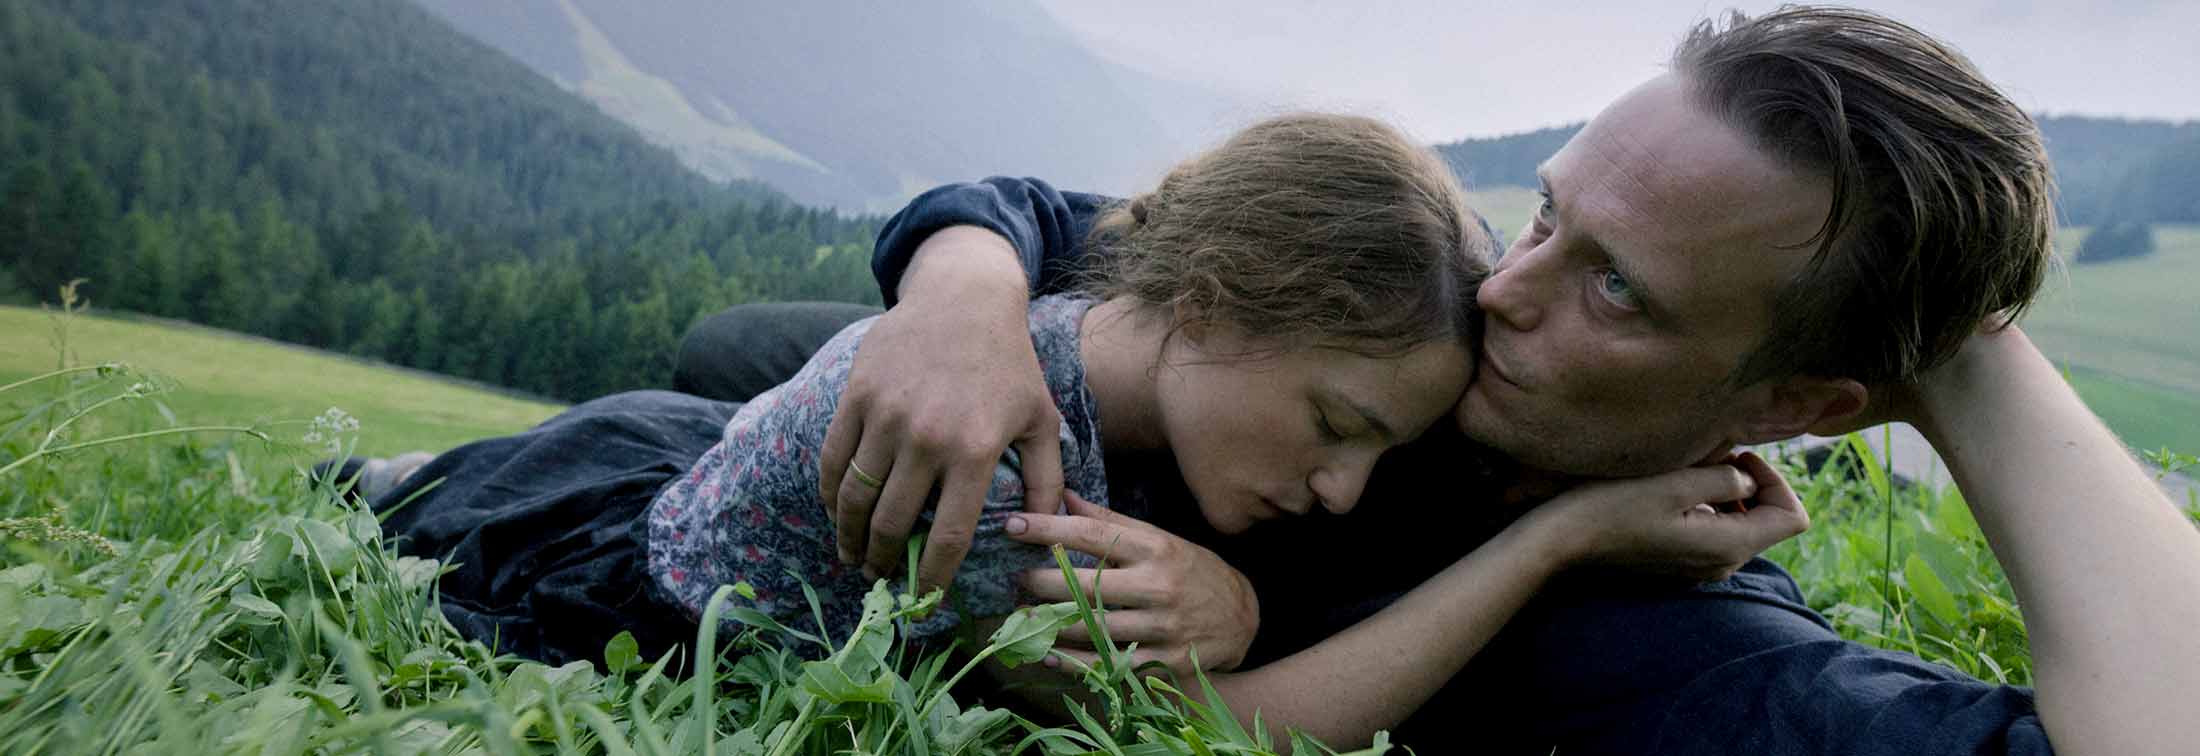 A Hidden Life - Terrence Malick's stunning ode to the power of kindness